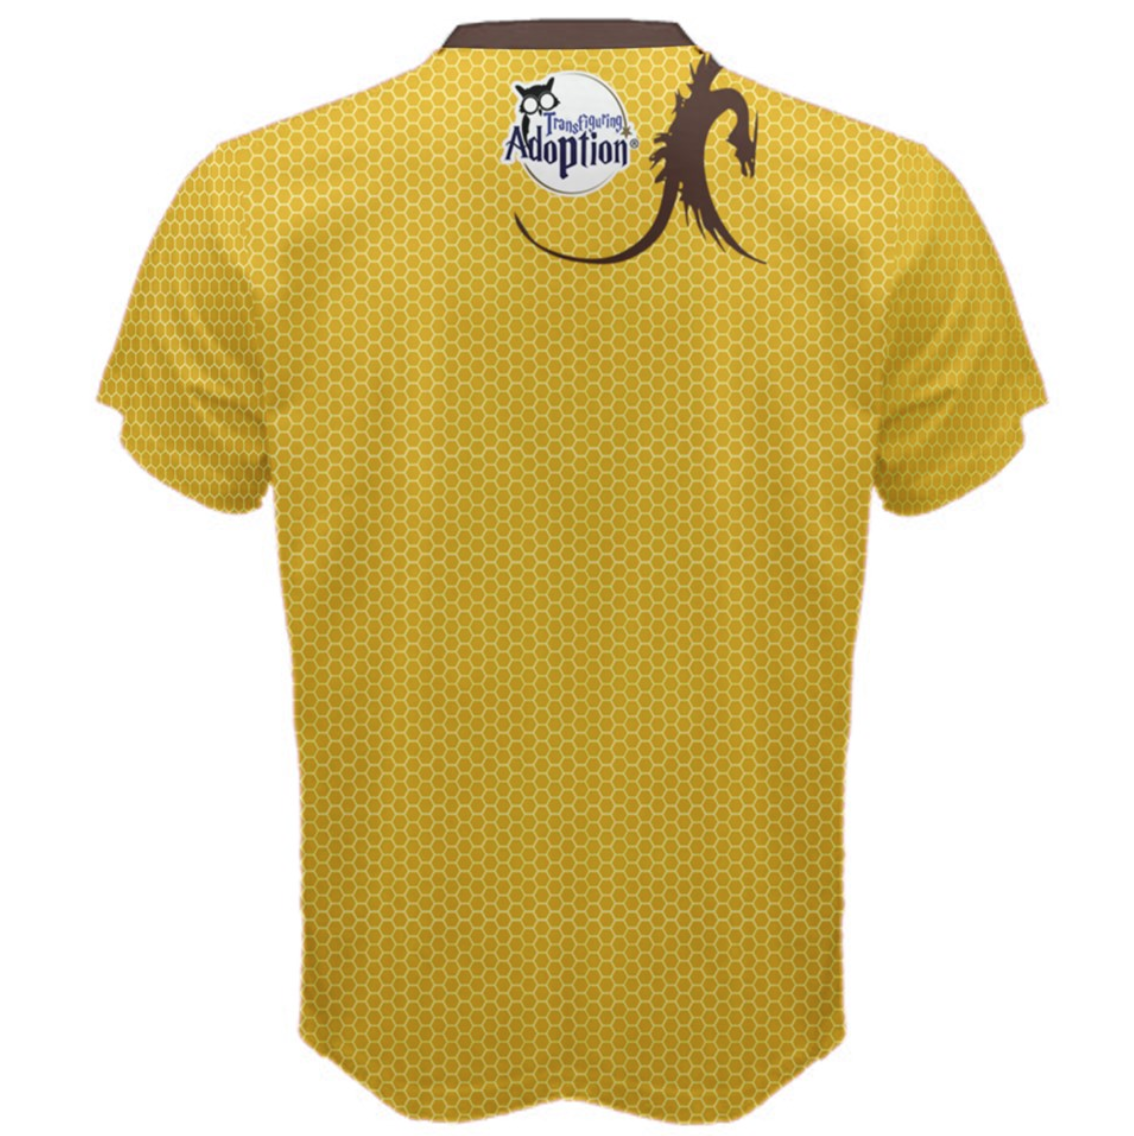 See The "TRUE" Child (Yellow Patterned) Cotton Tee - Inspired by Literary Character, Hagrid